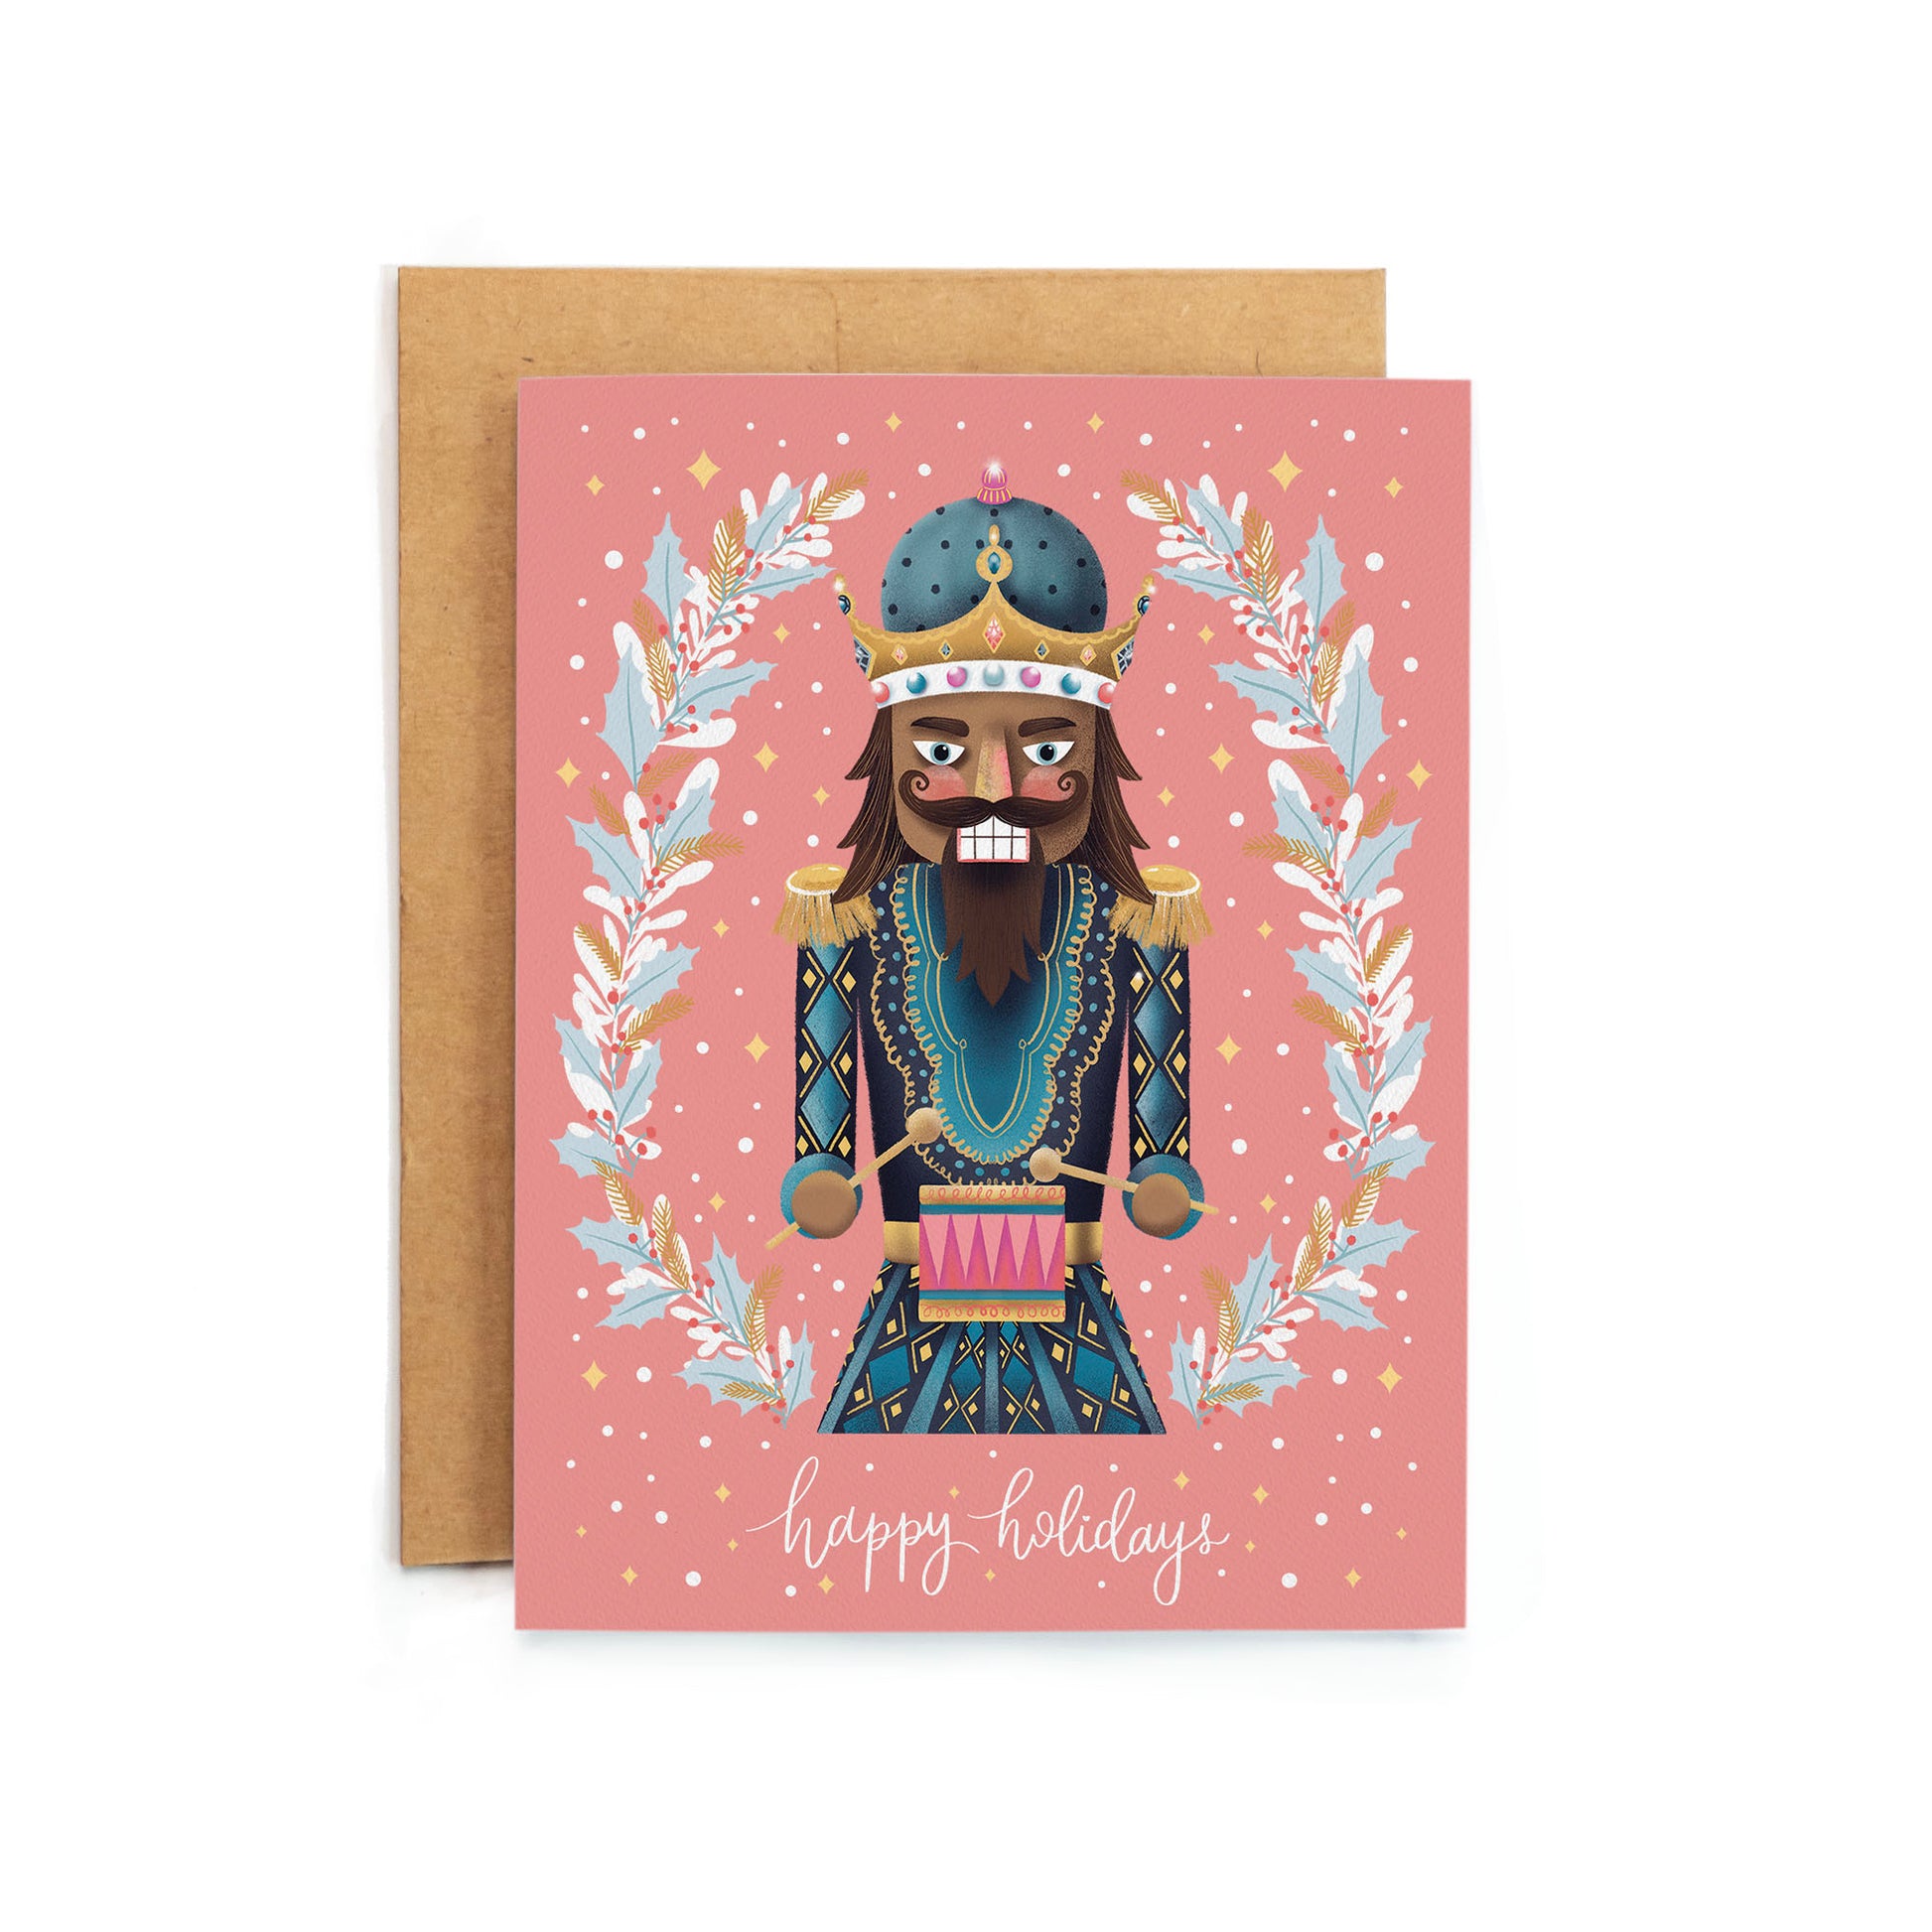 a card with a cartoon character wearing a crown